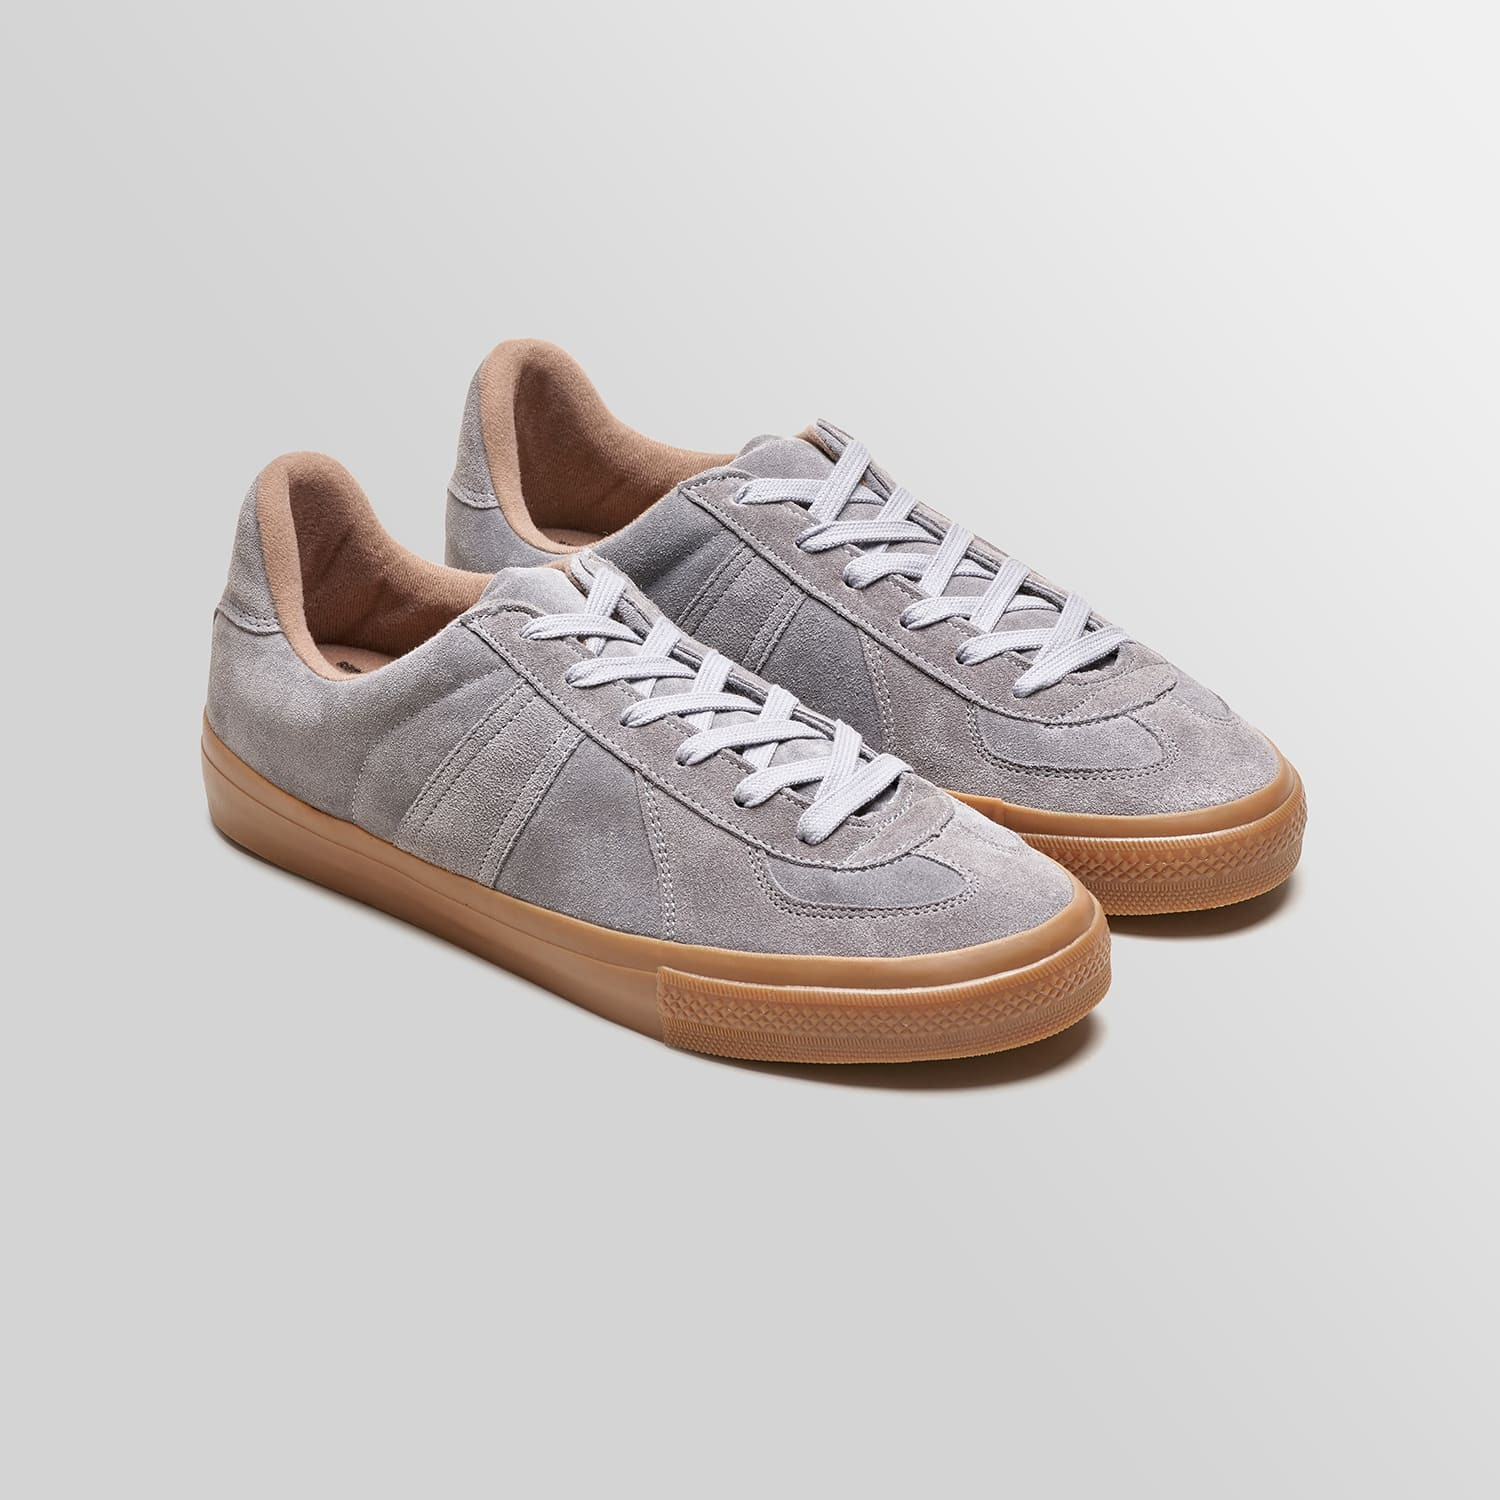 GERMAN MILITARY TRAINER (GRAY SUEDE)